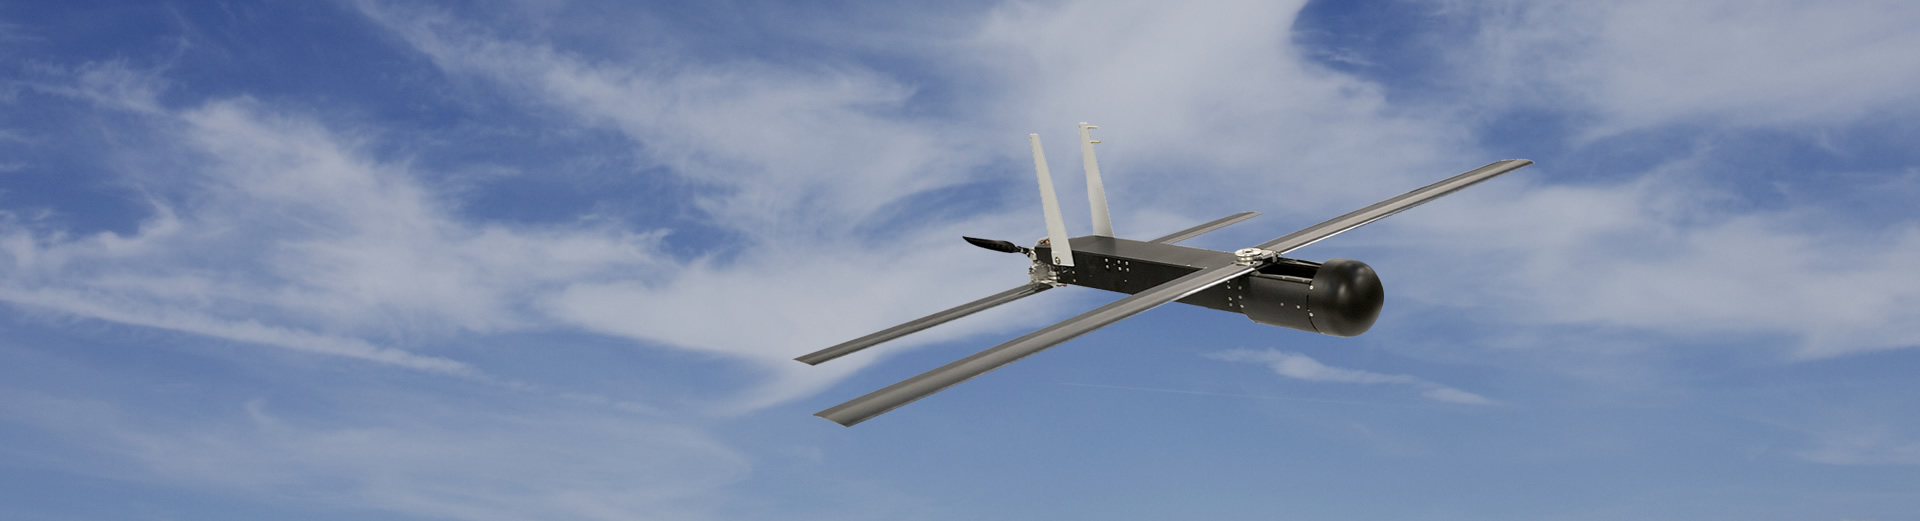 Will Raytheon Counter-Drone System Head To Mideast With Patriot?